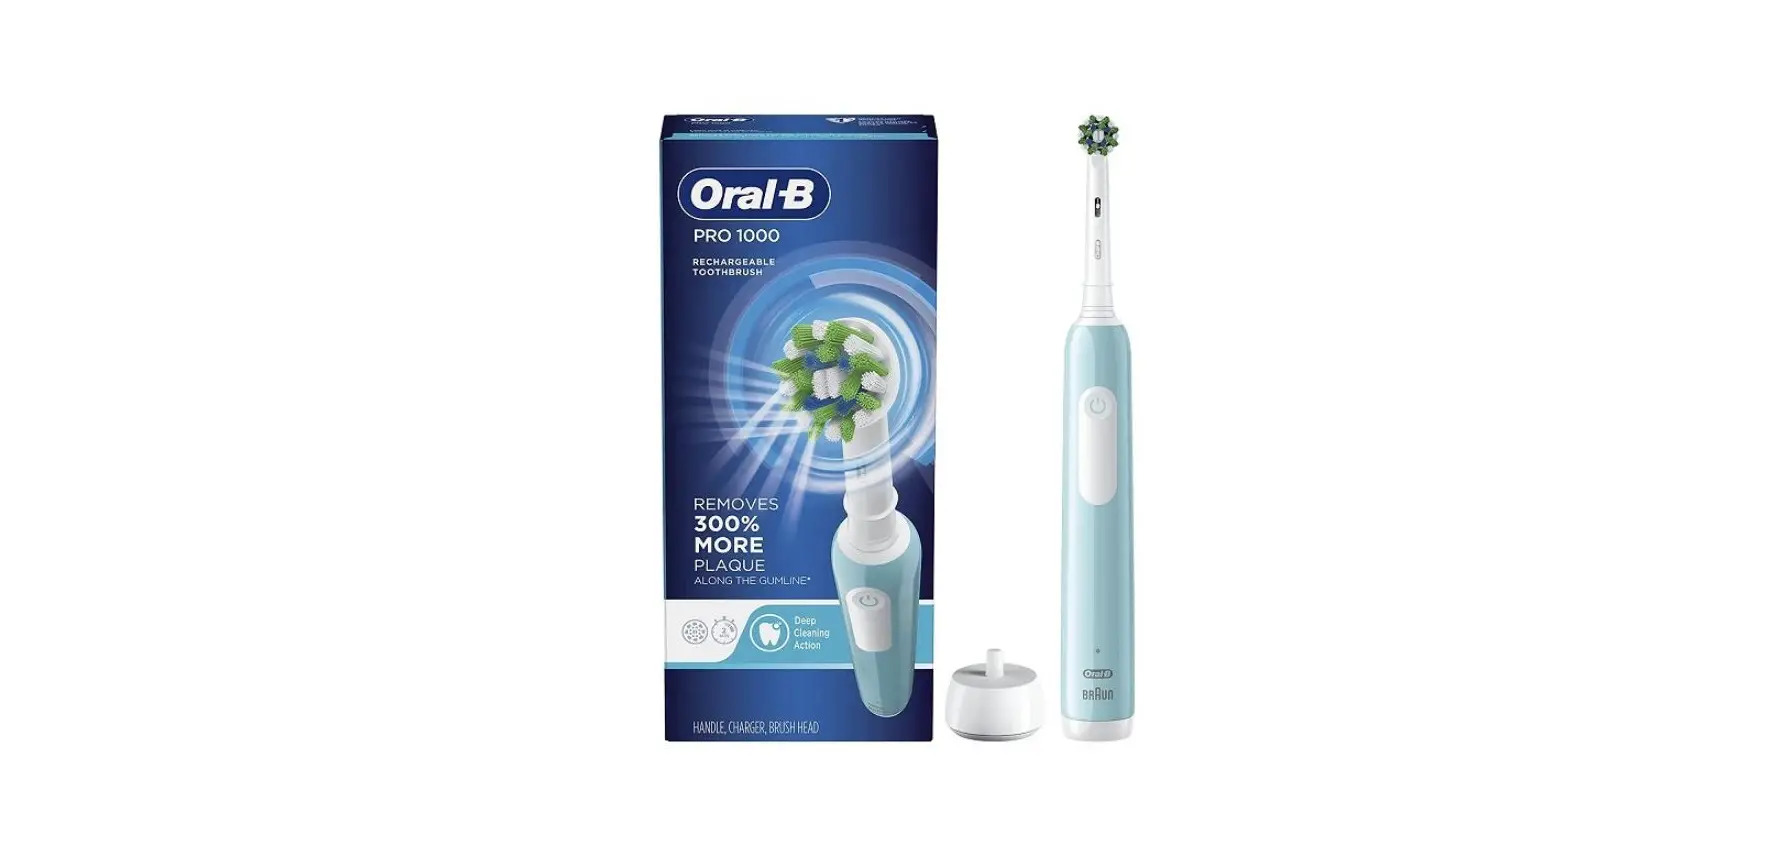 Oral-B 1000 Rechargeable Electric Toothbrush